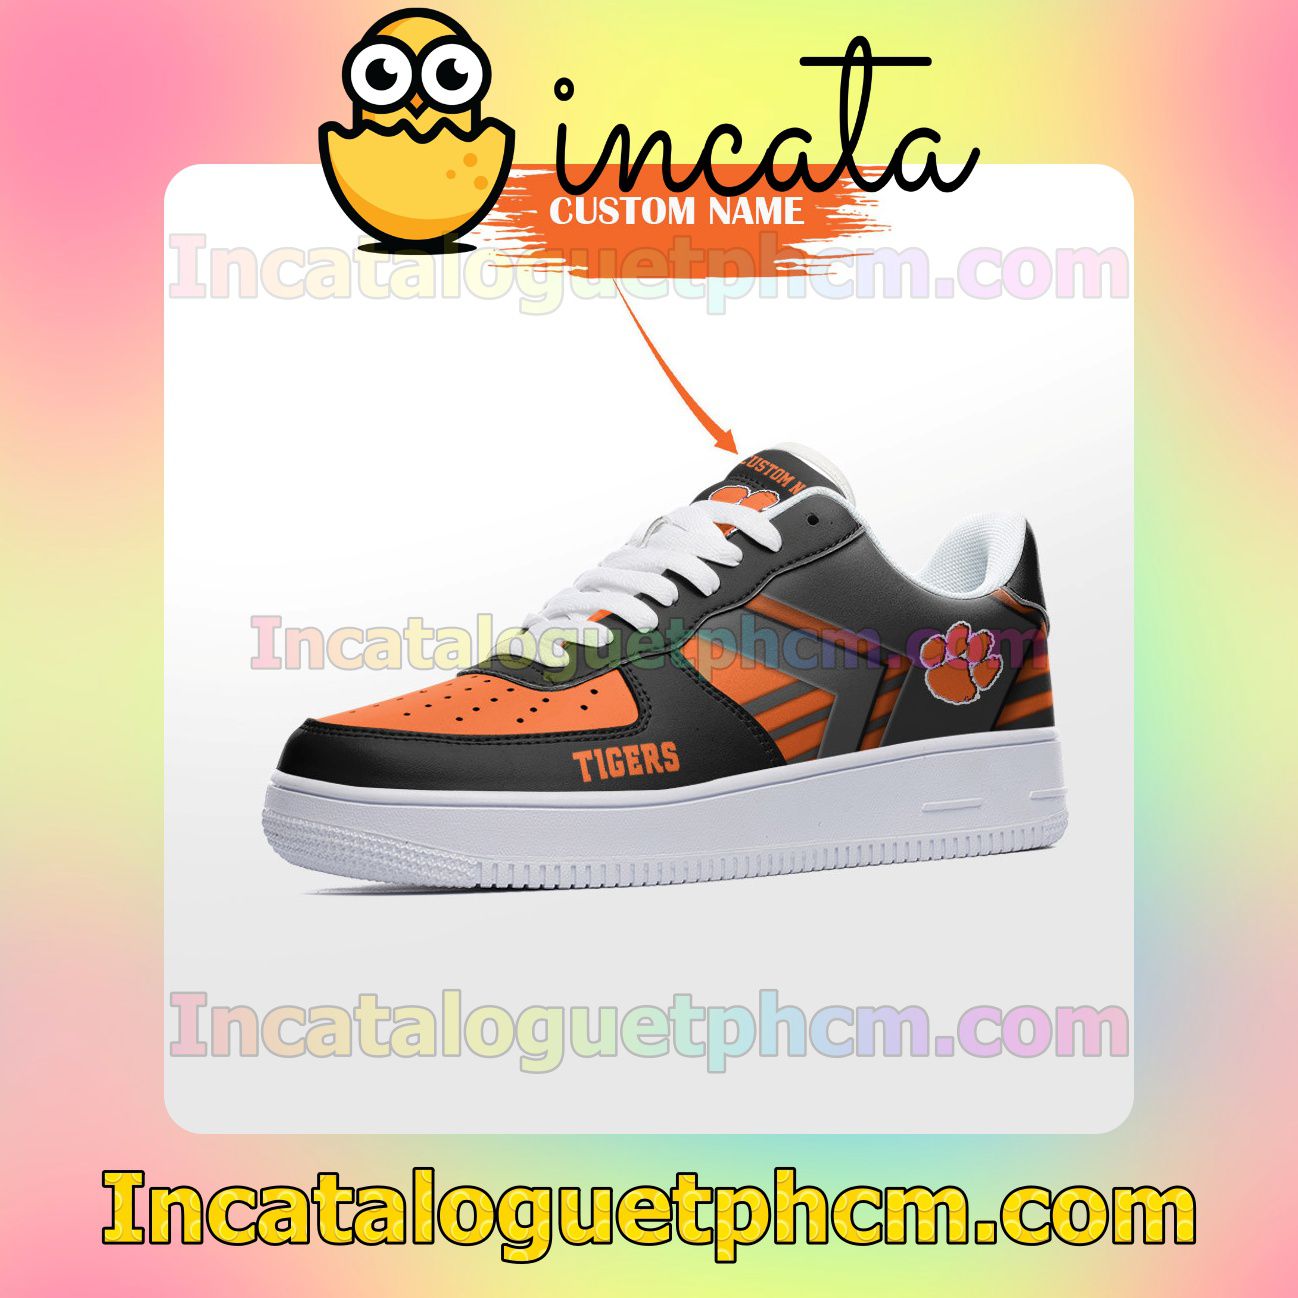 New Personalized NCAA Clemson Tigers Custom Name Nike Low Shoes Sneakers